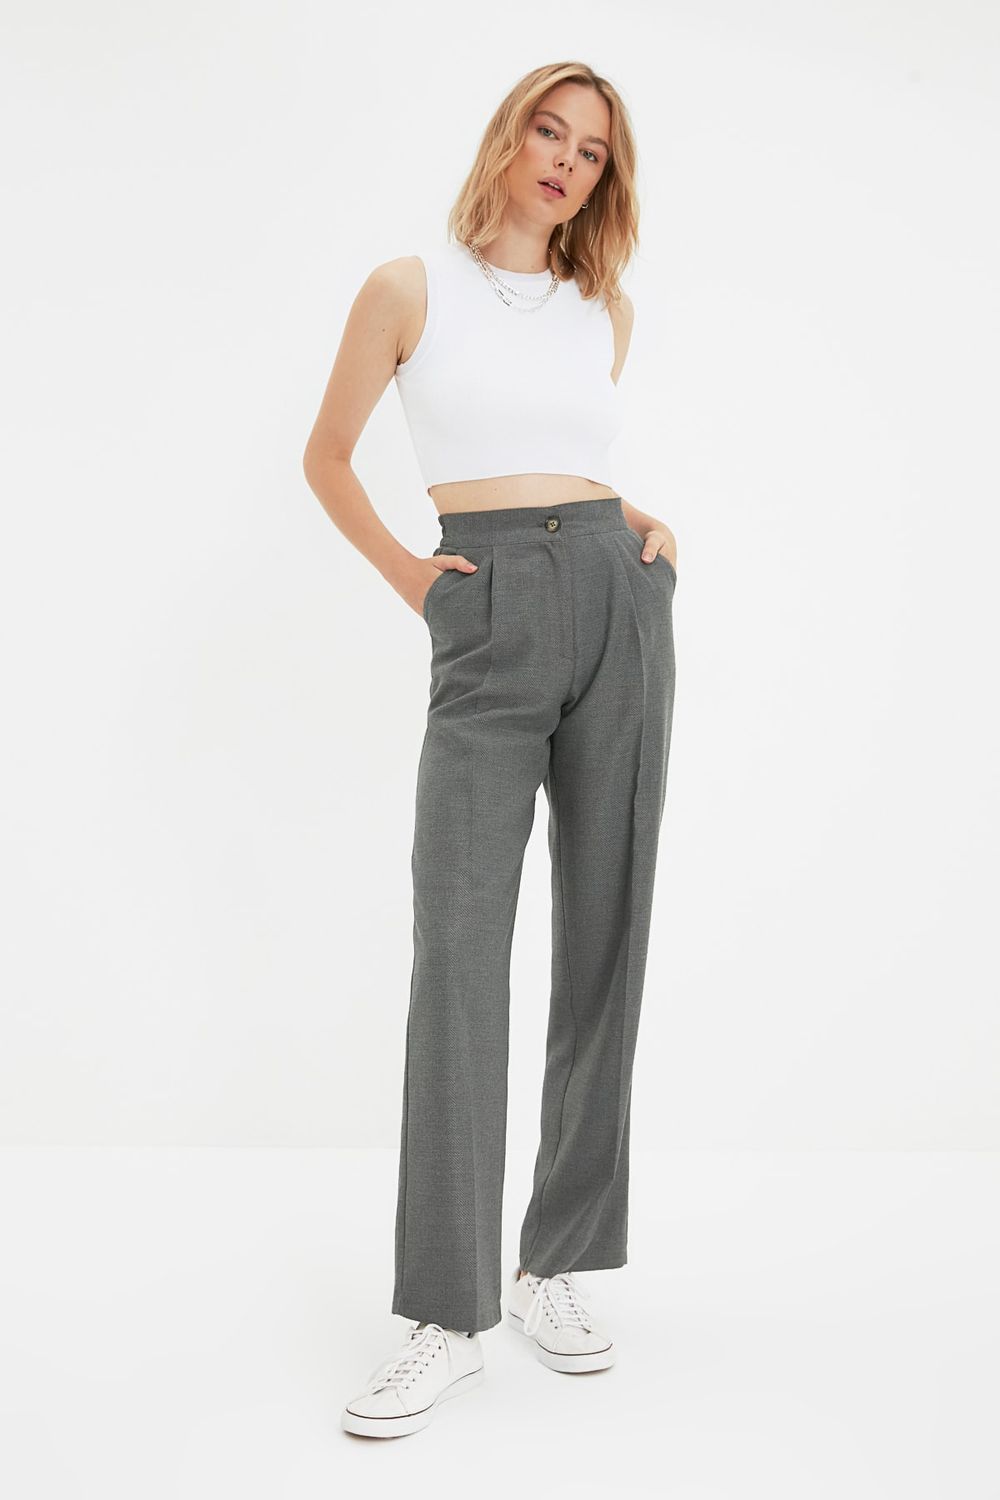 Jeans & Trousers | Trendyol Straight Fit Jeans | Freeup